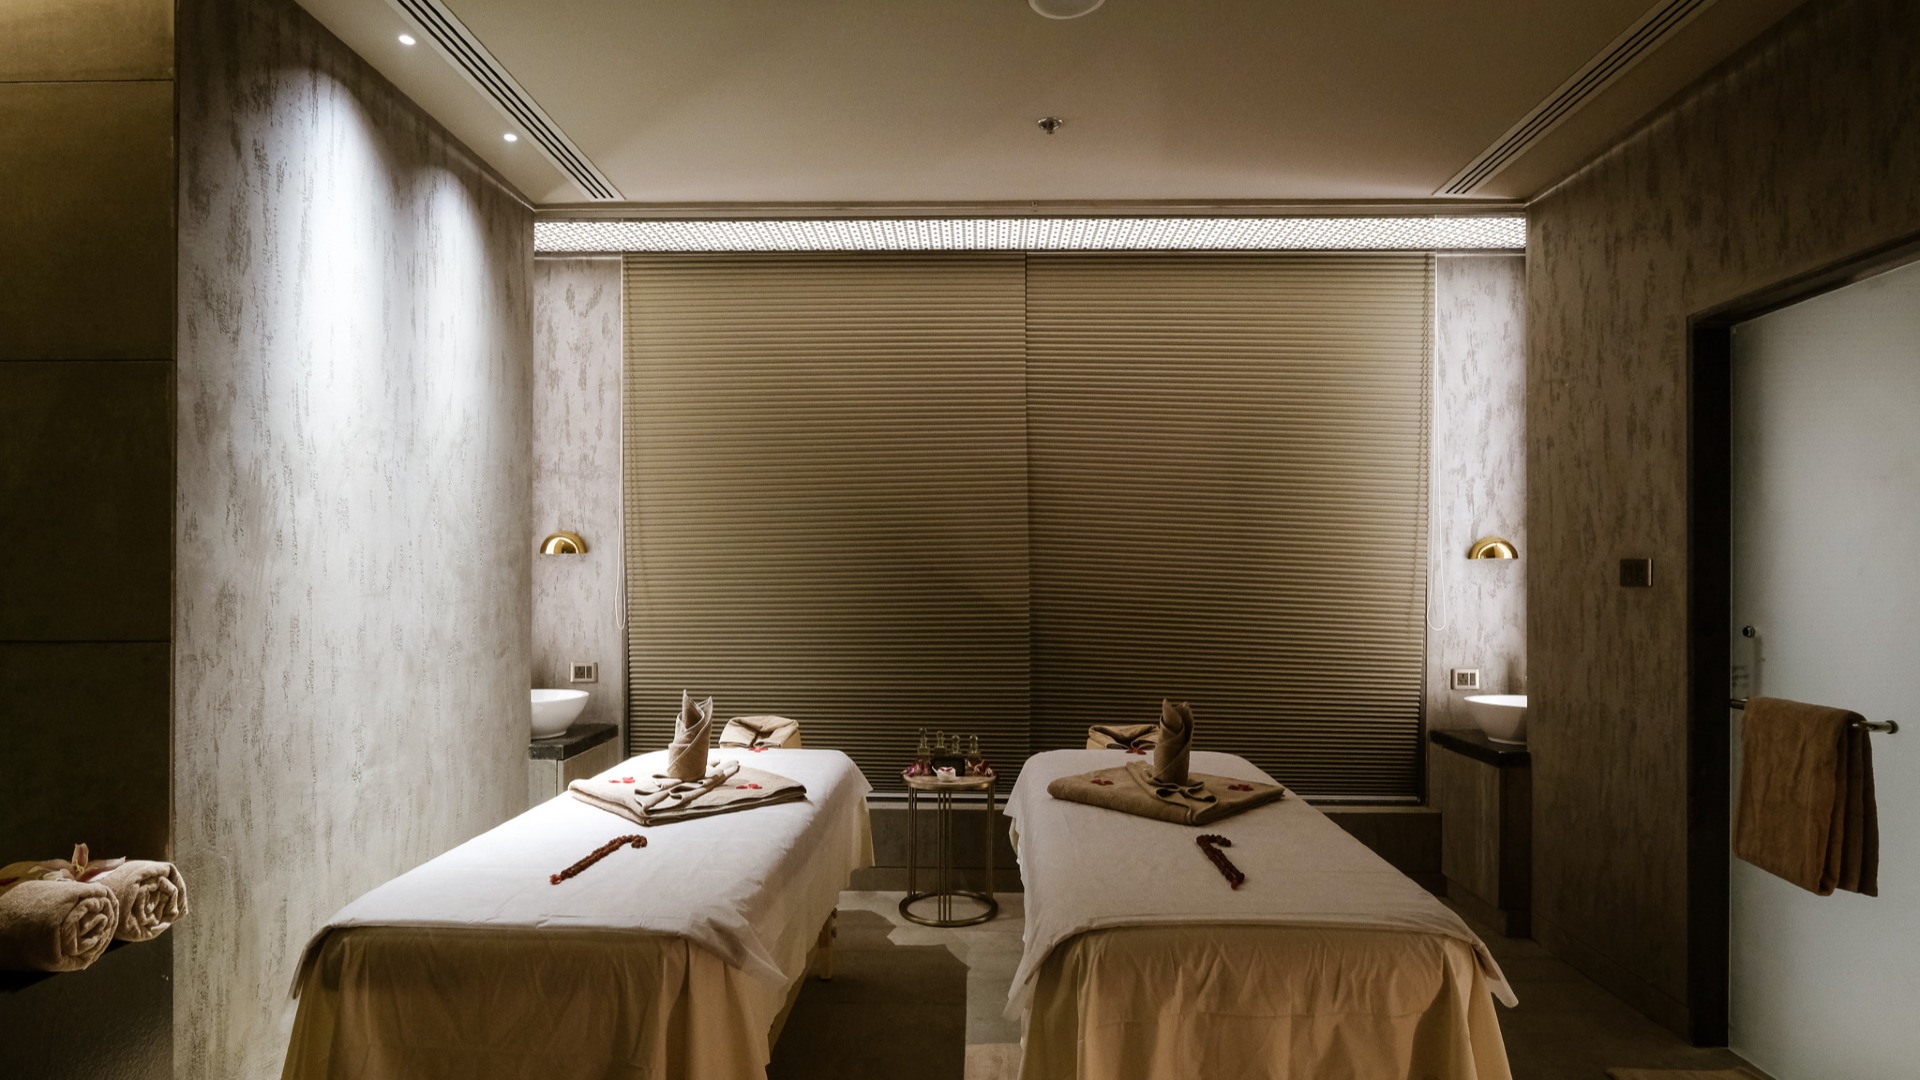 Aura Spa at The Park Hotels Indore